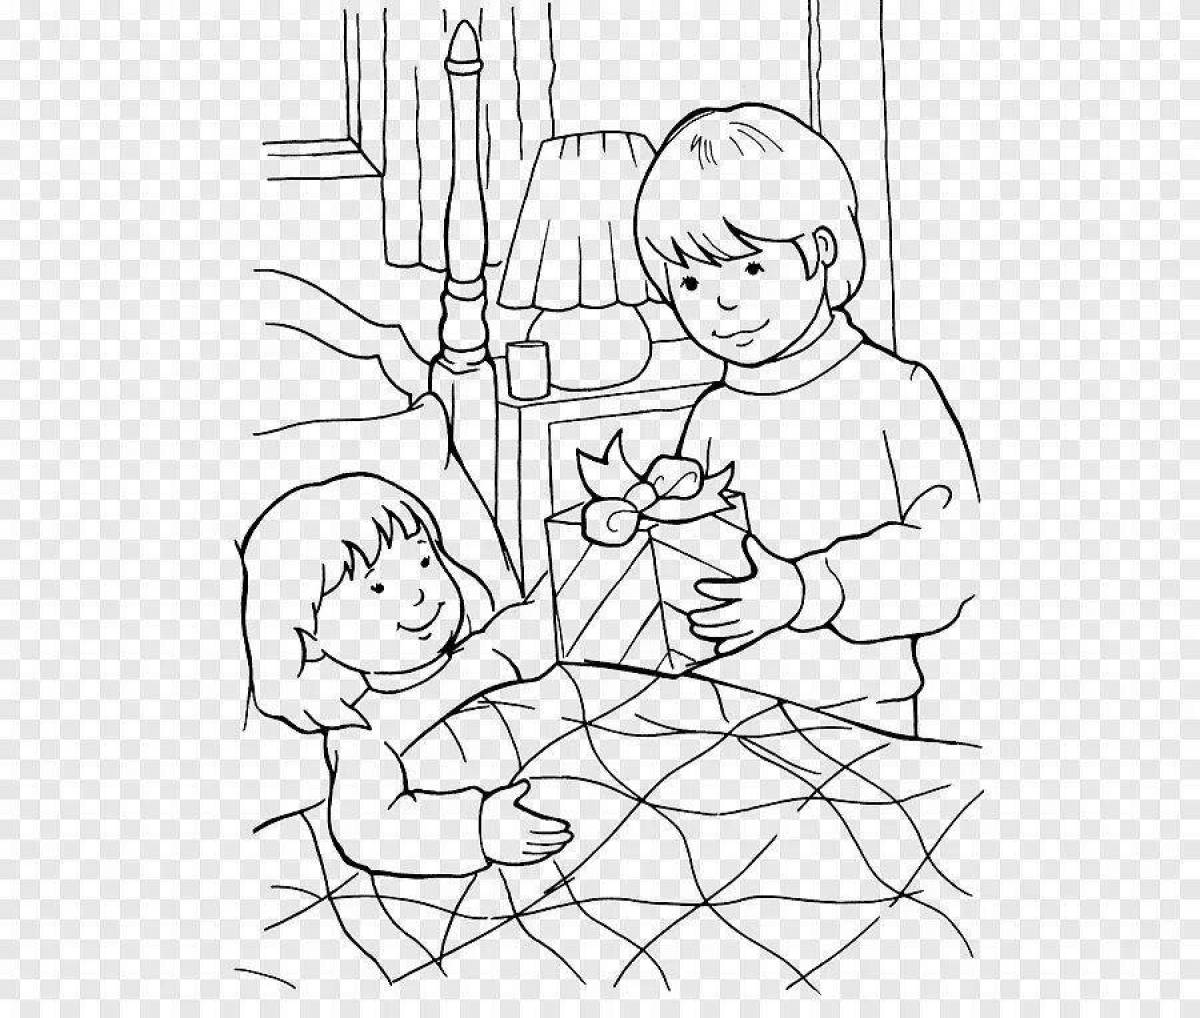 Coloring page comfort with good deeds